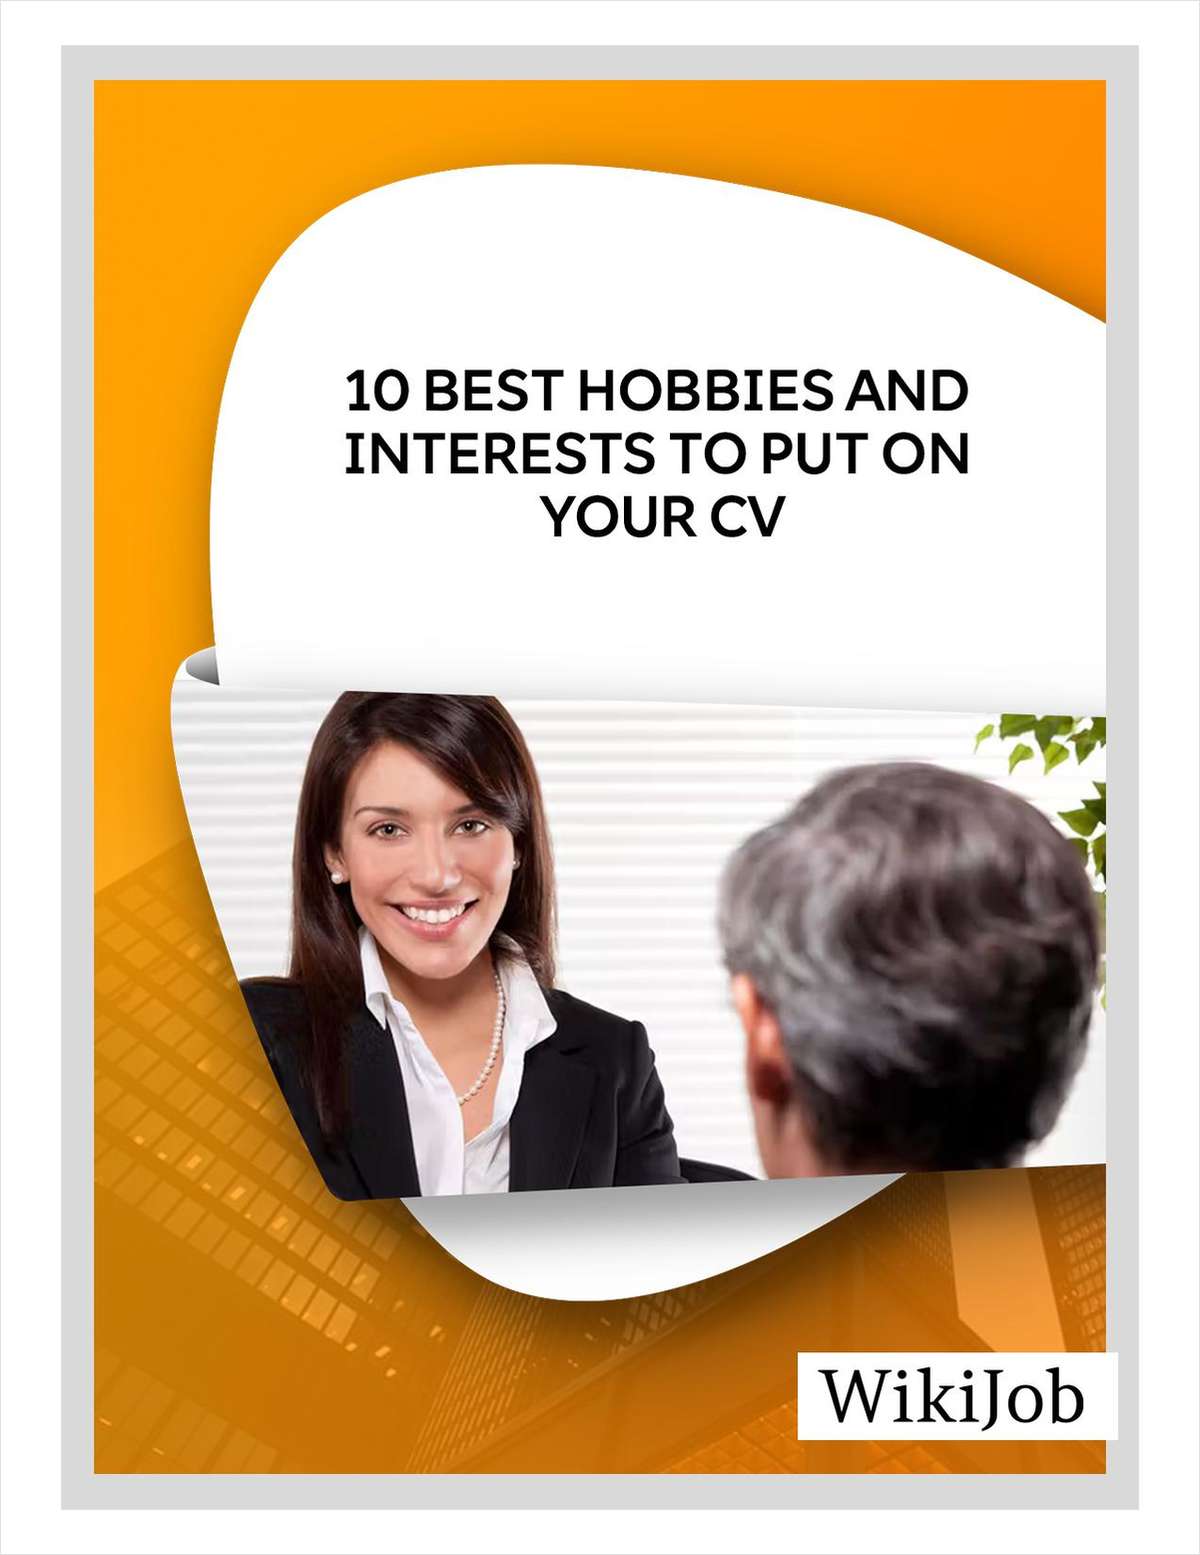 10 Best Hobbies and Interests to Put On Your CV